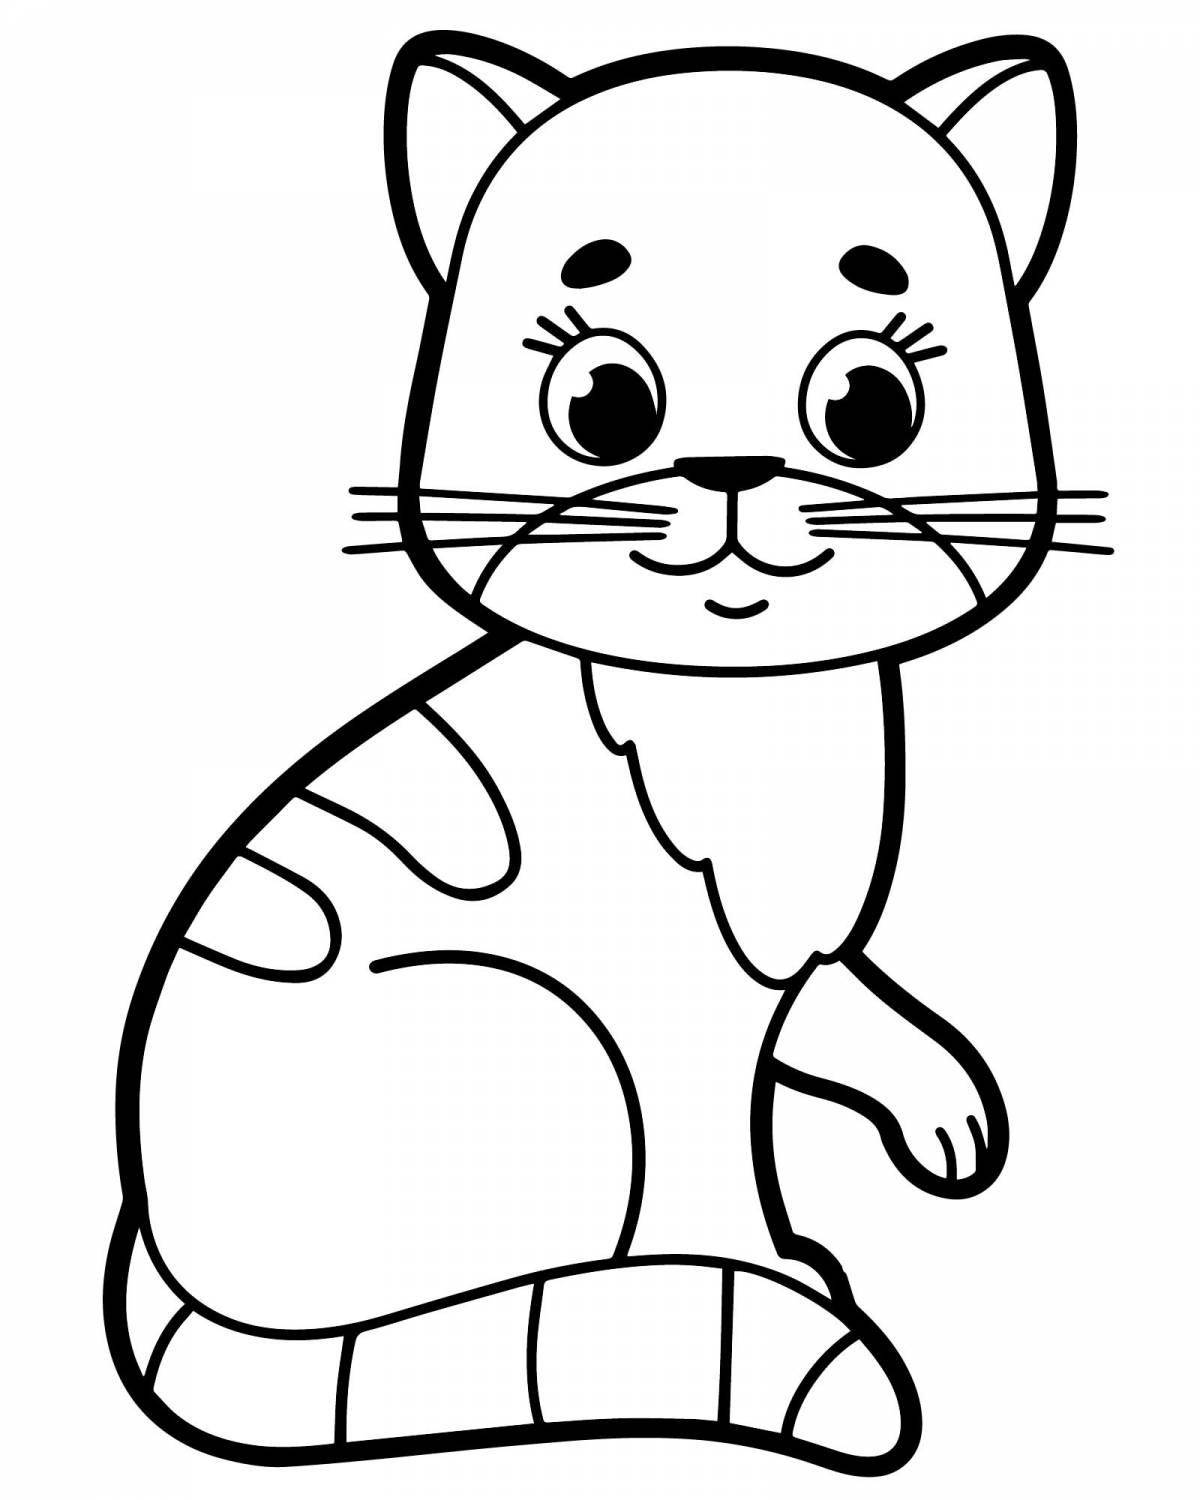 Playful coloring cat for children 4-5 years old